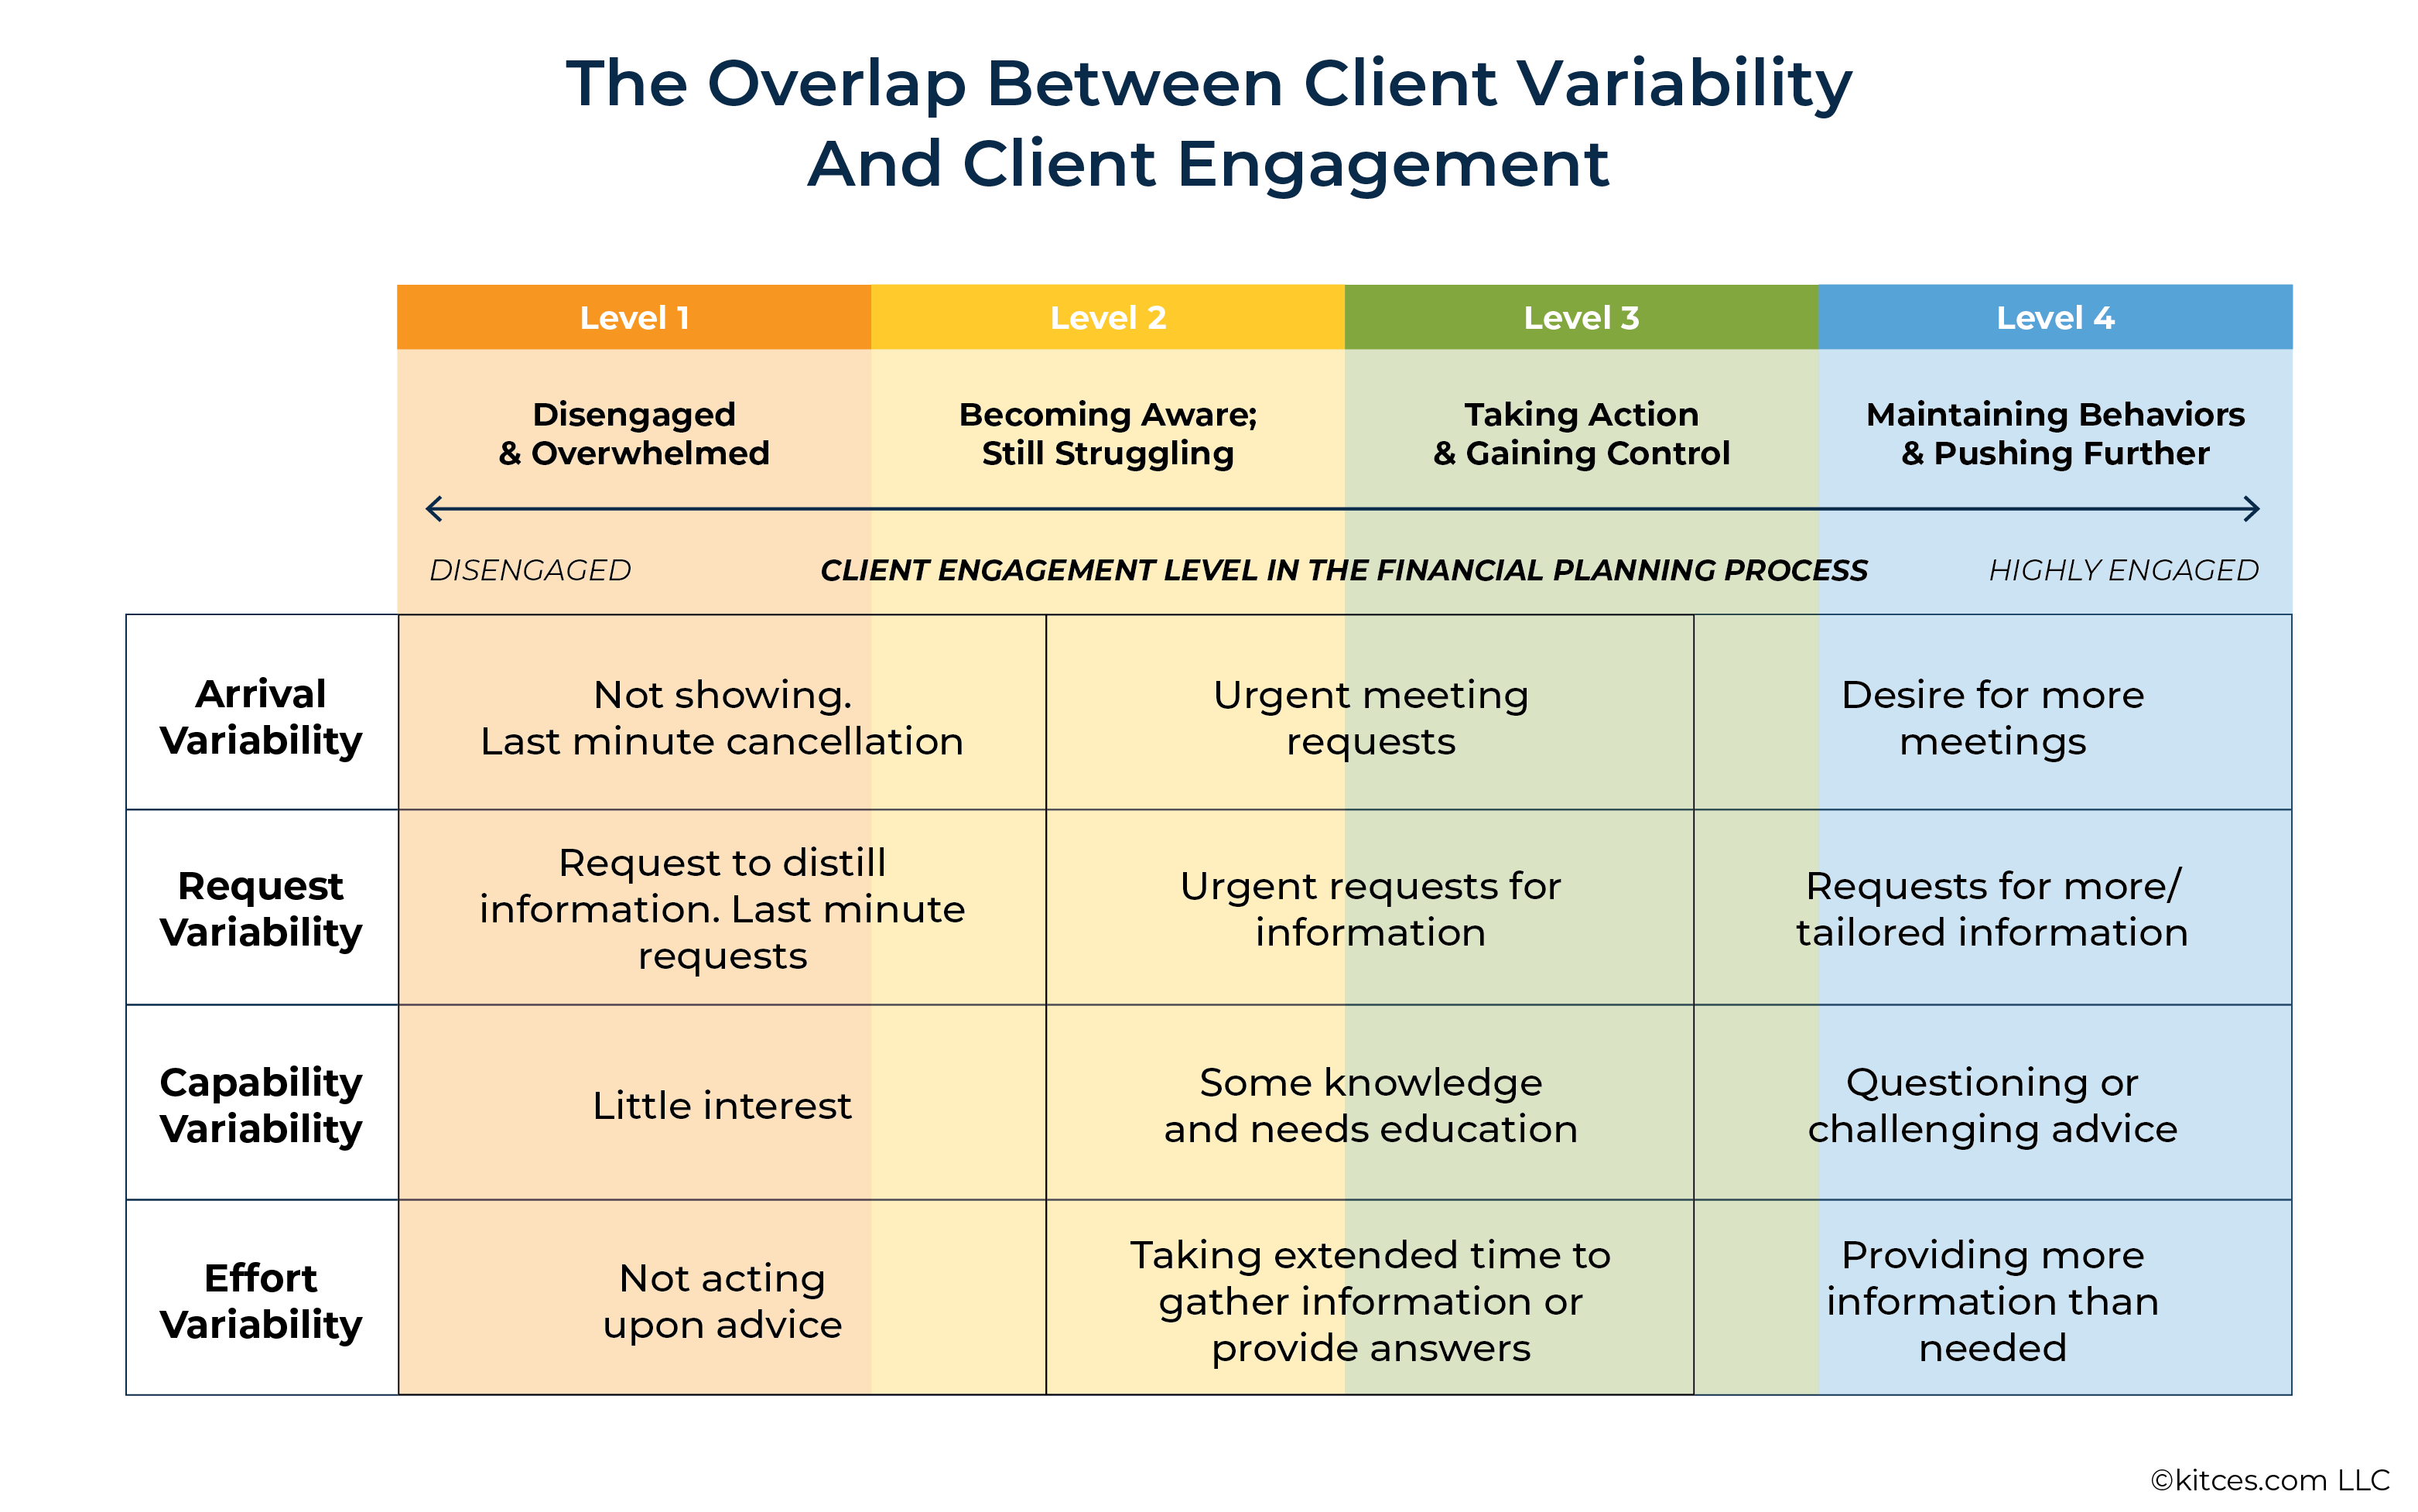 The Overlap Between Client Variability And Client Engagement